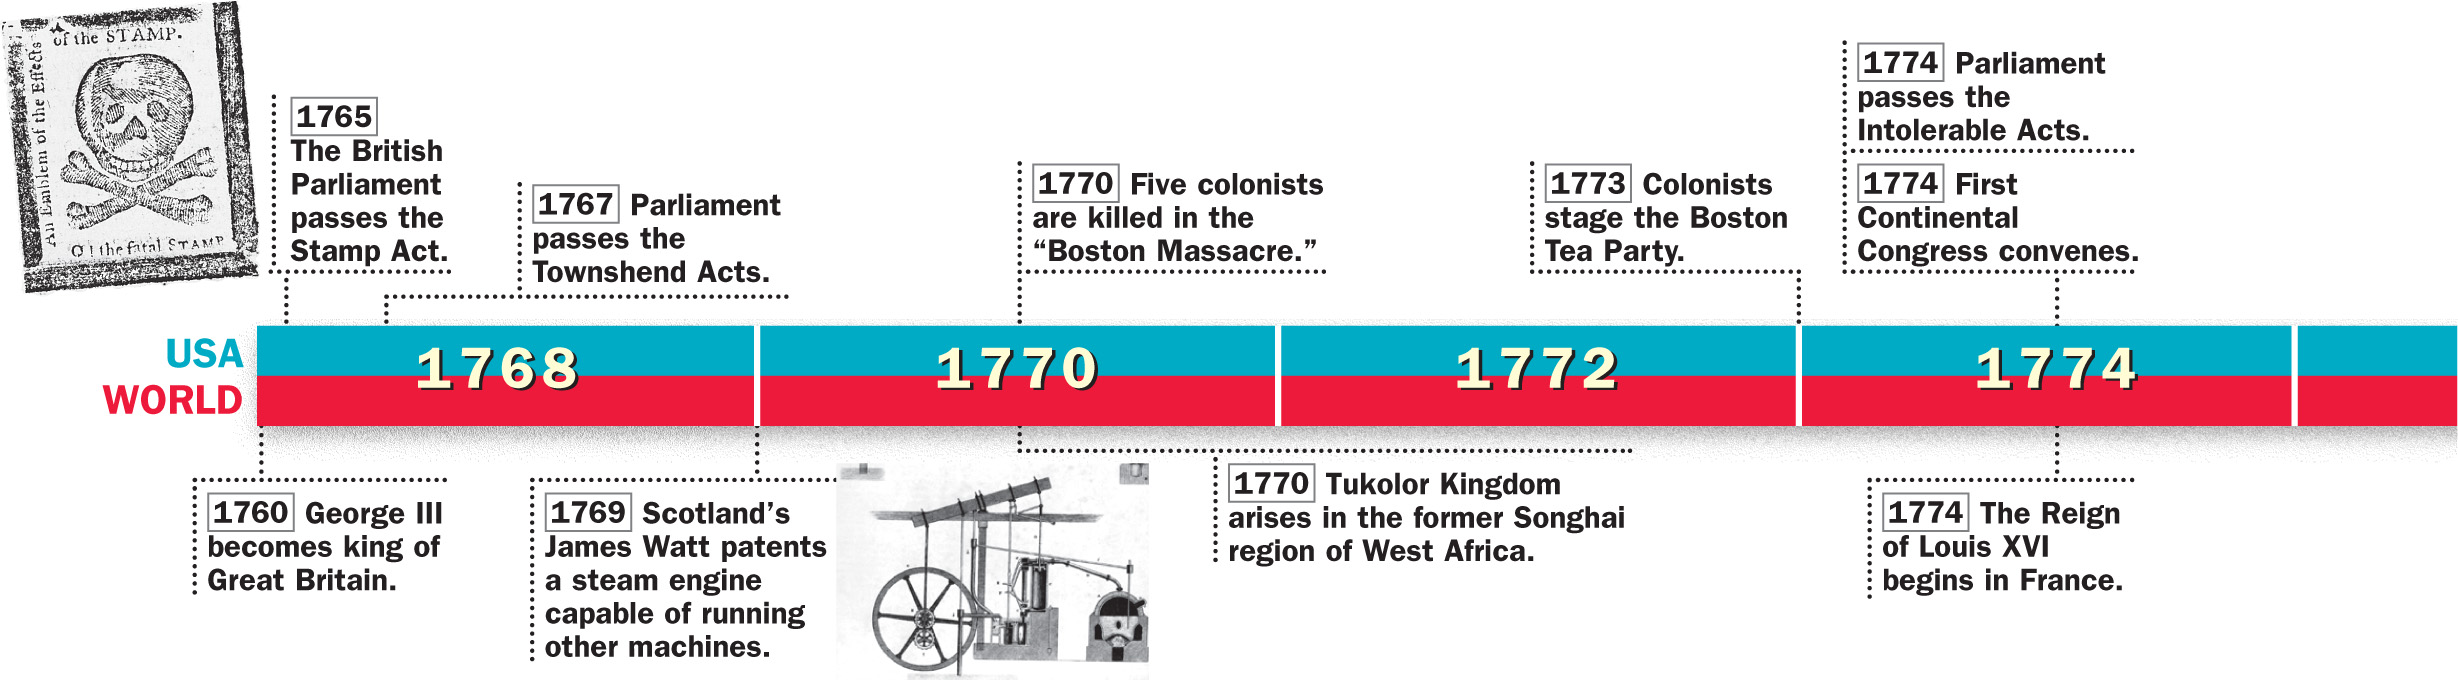 A timeline of historical events from 1760 to 1783 in both the U.S. and the world